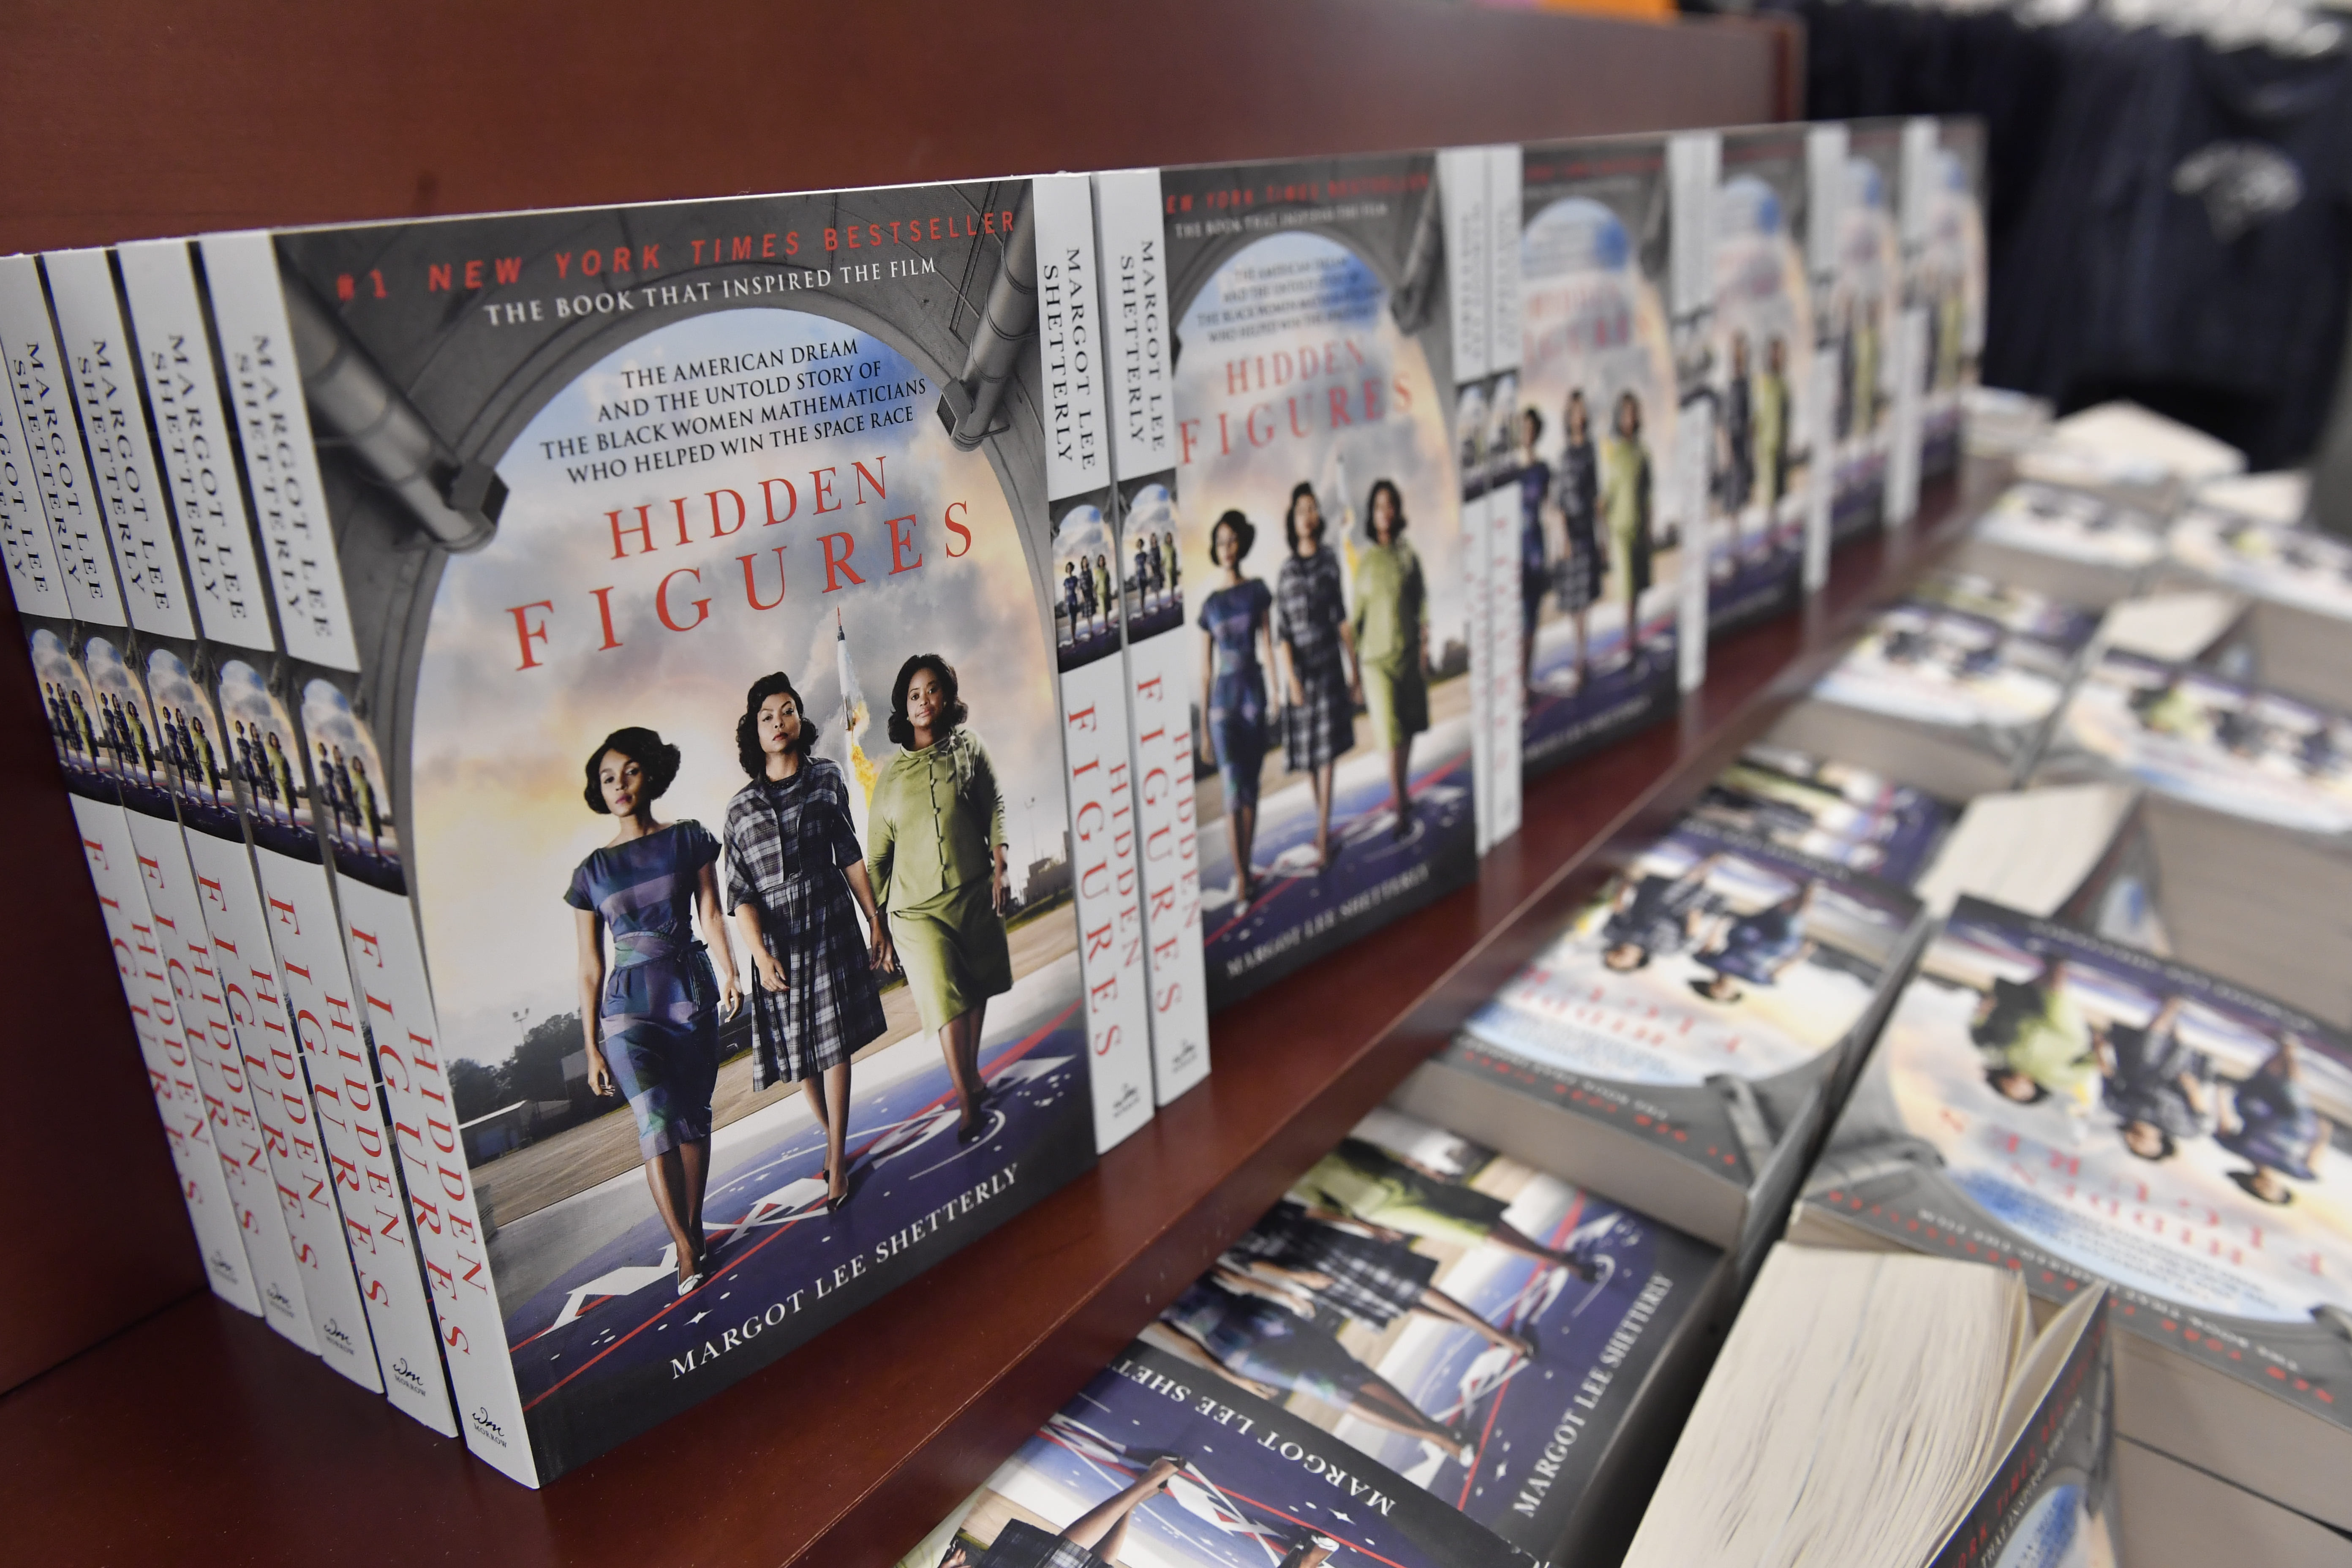 The 2017-2018 Campus Read book, Hidden Figures by Margot Lee Shetterly is on display for purchase at the downtown book store 